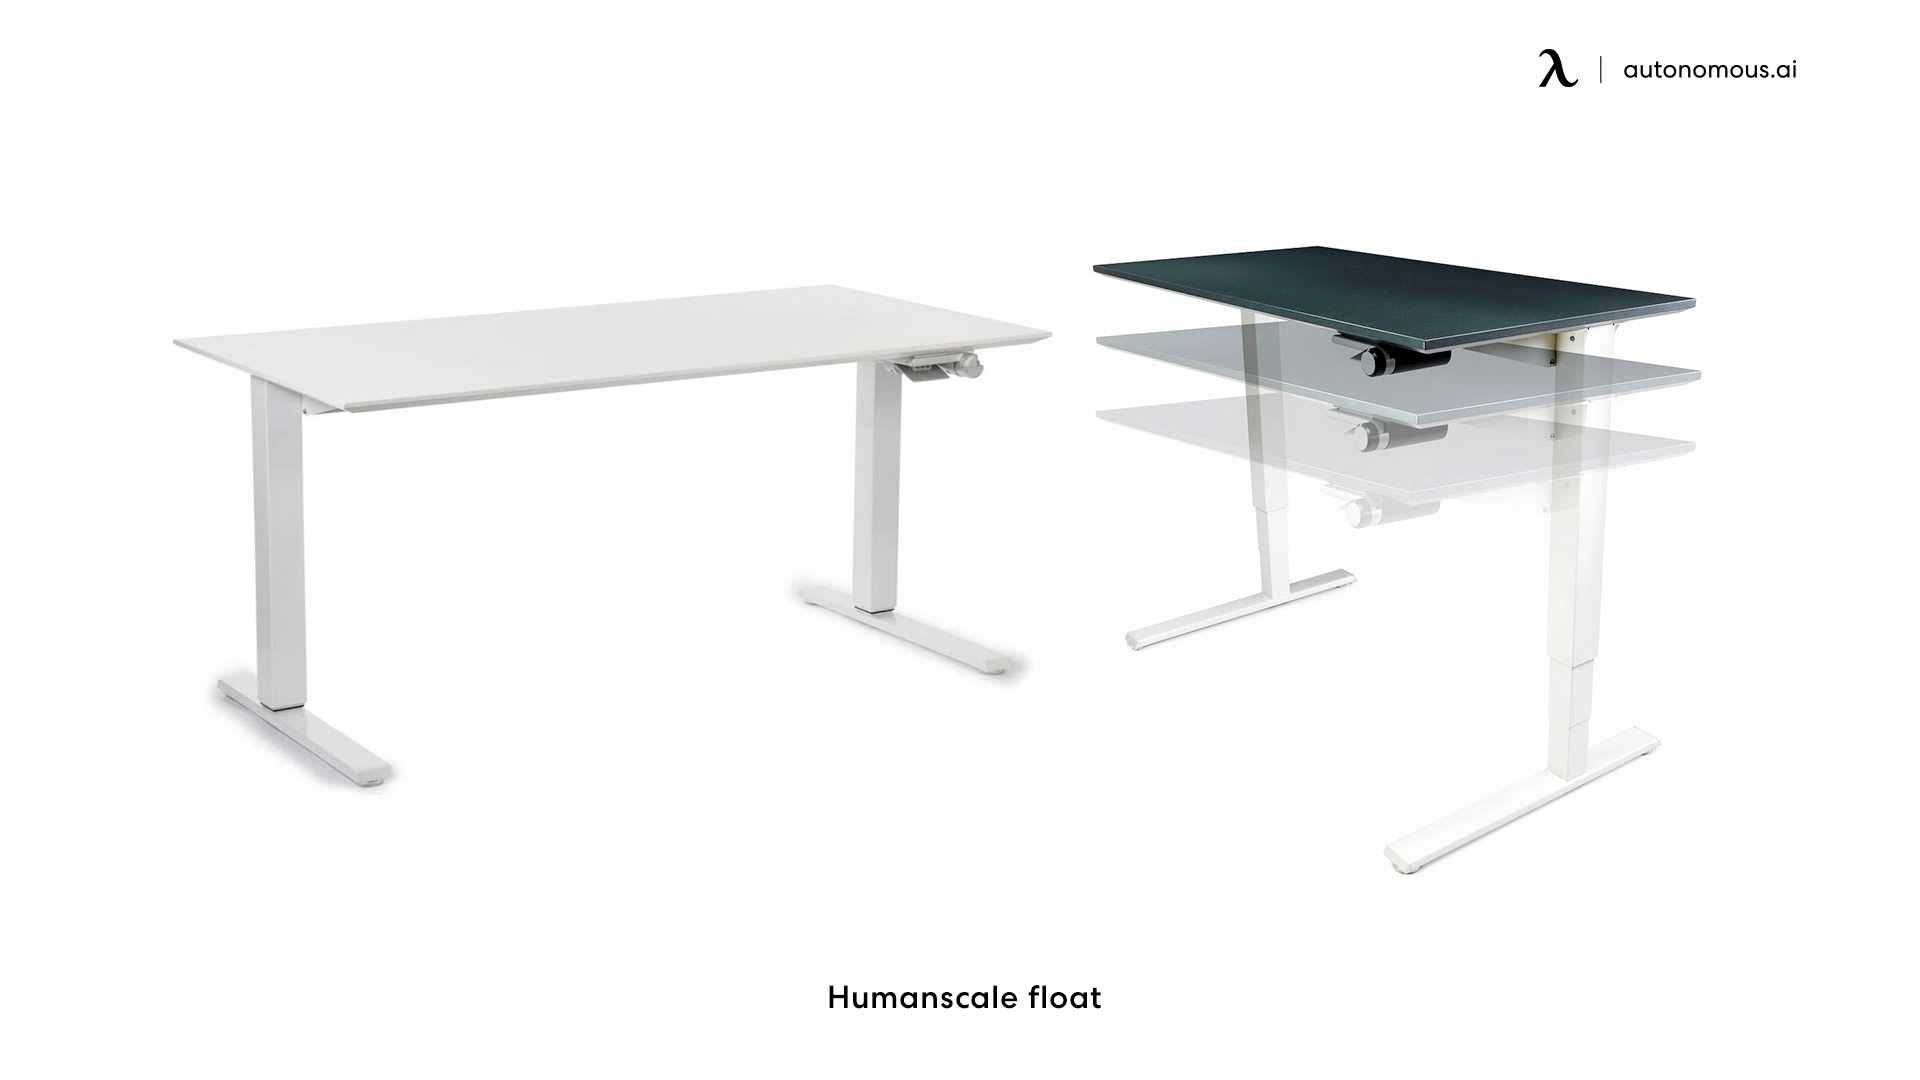 Humanscale float